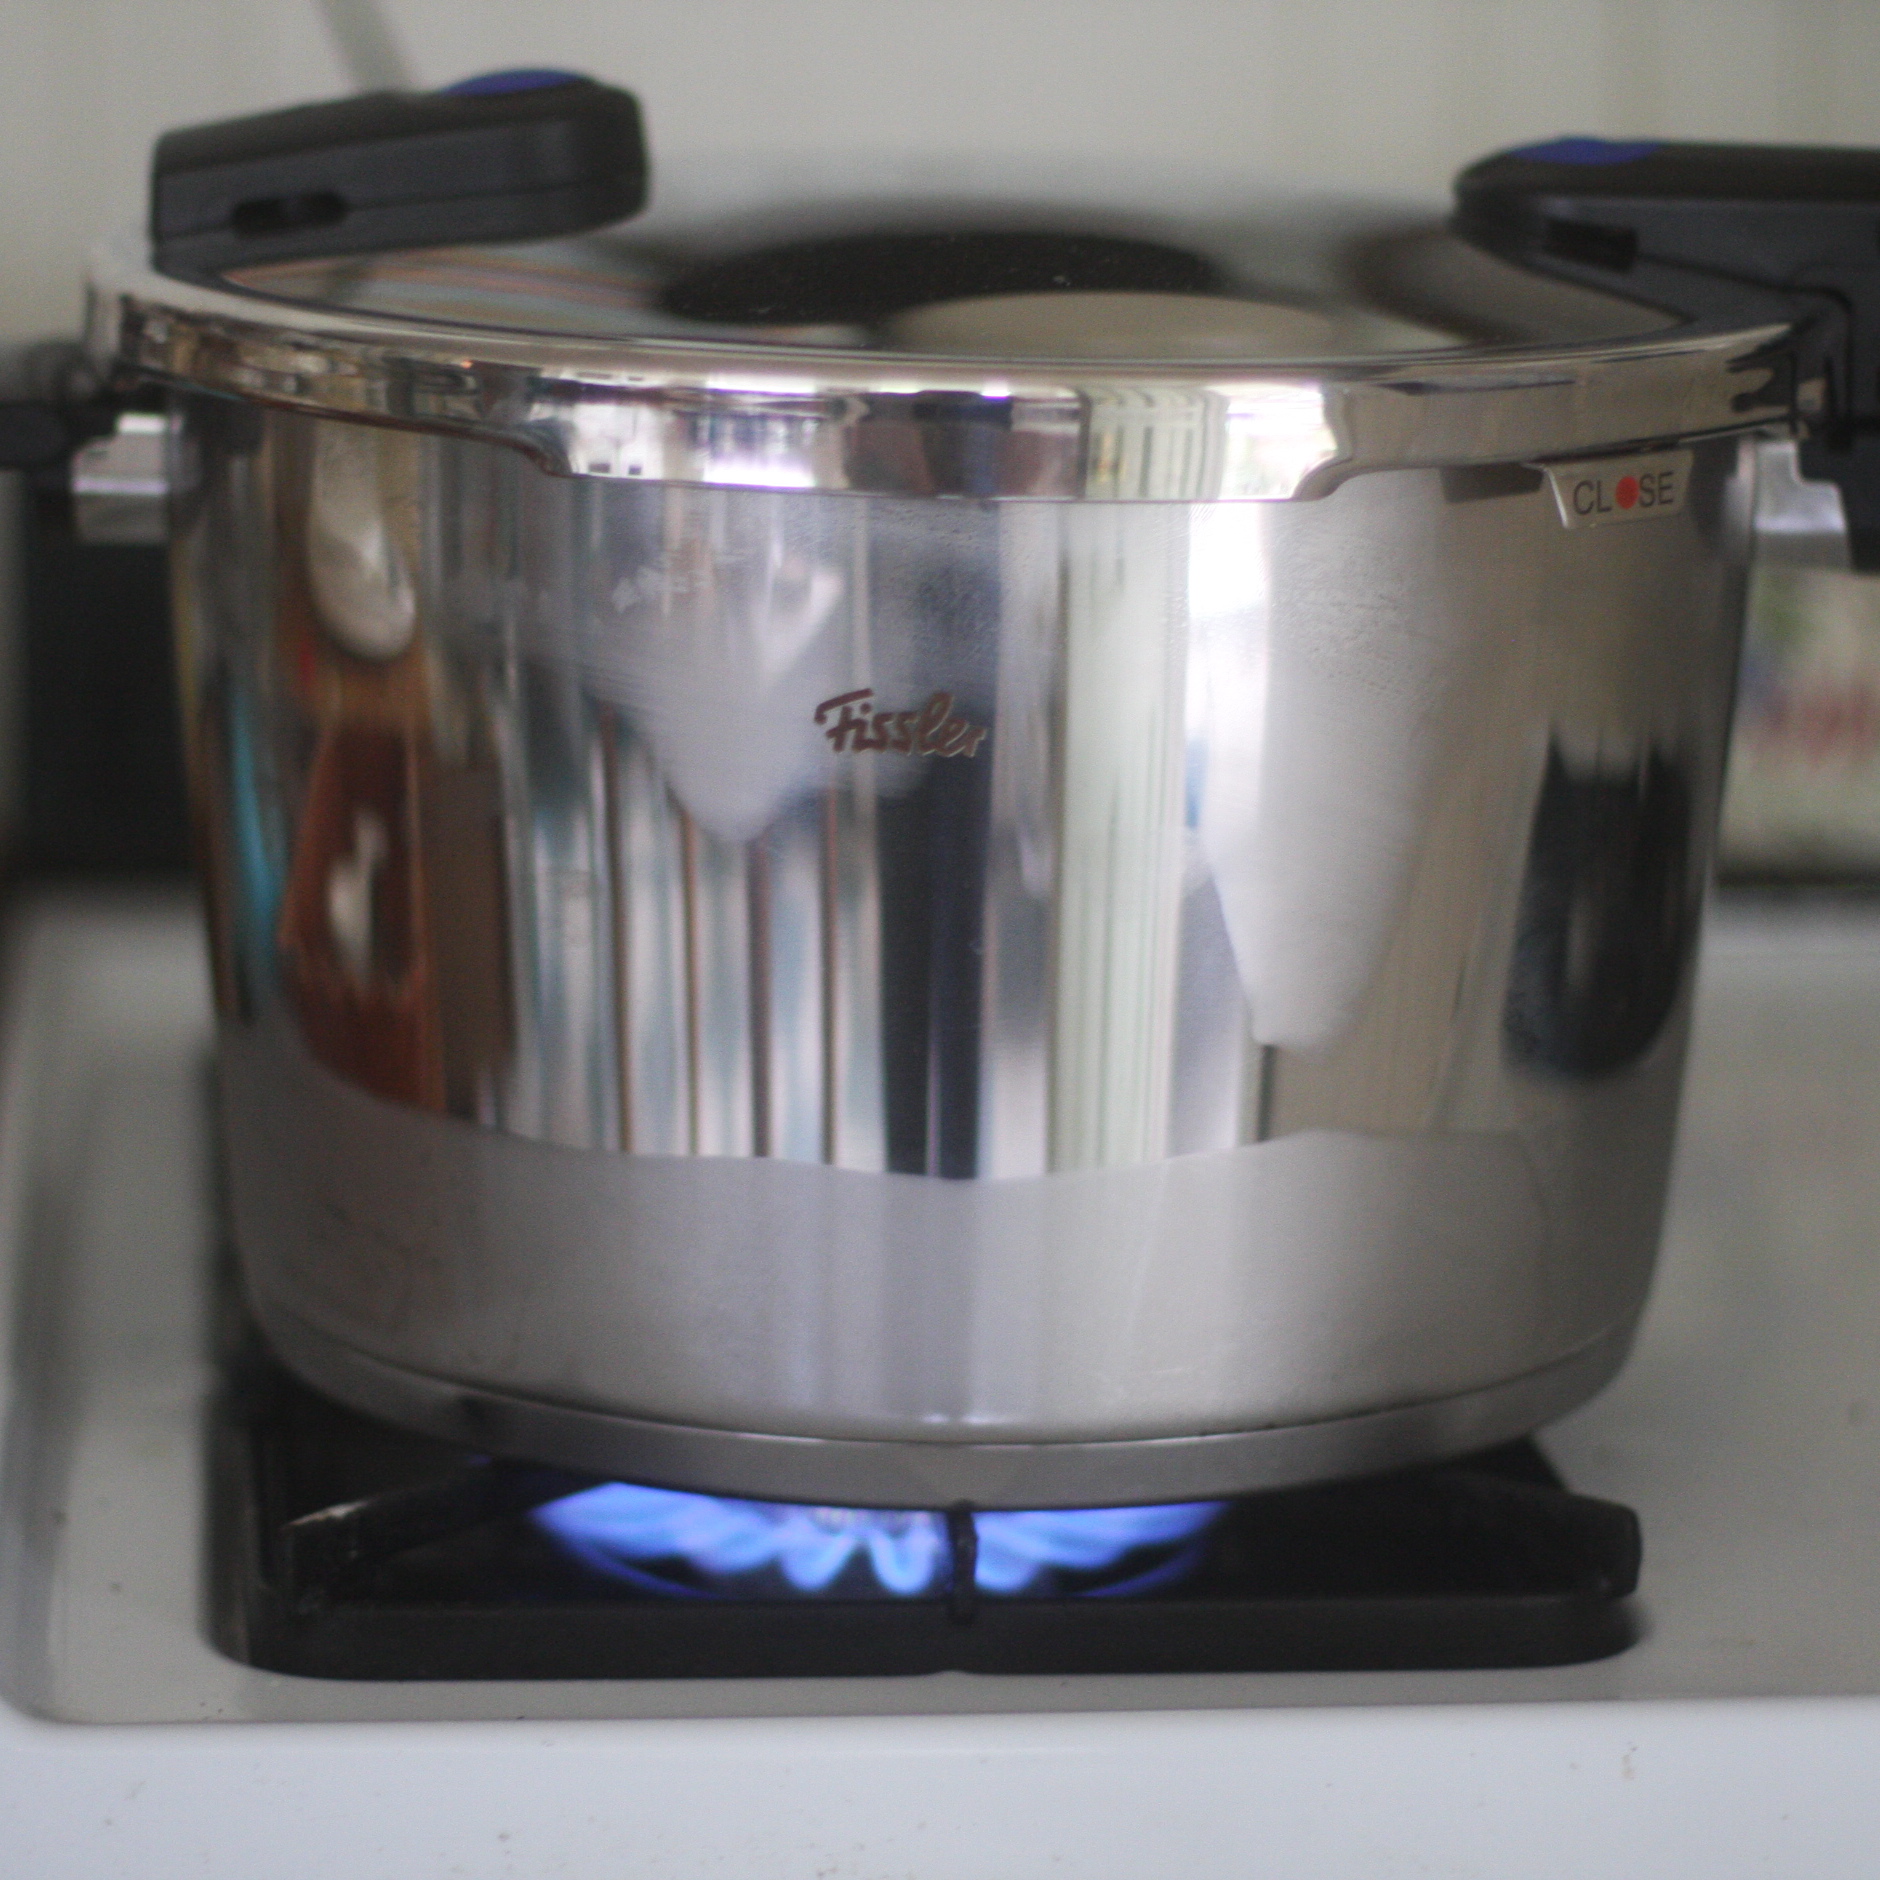 This Star Wars Pressure Cooker Uses the (Electric) Force